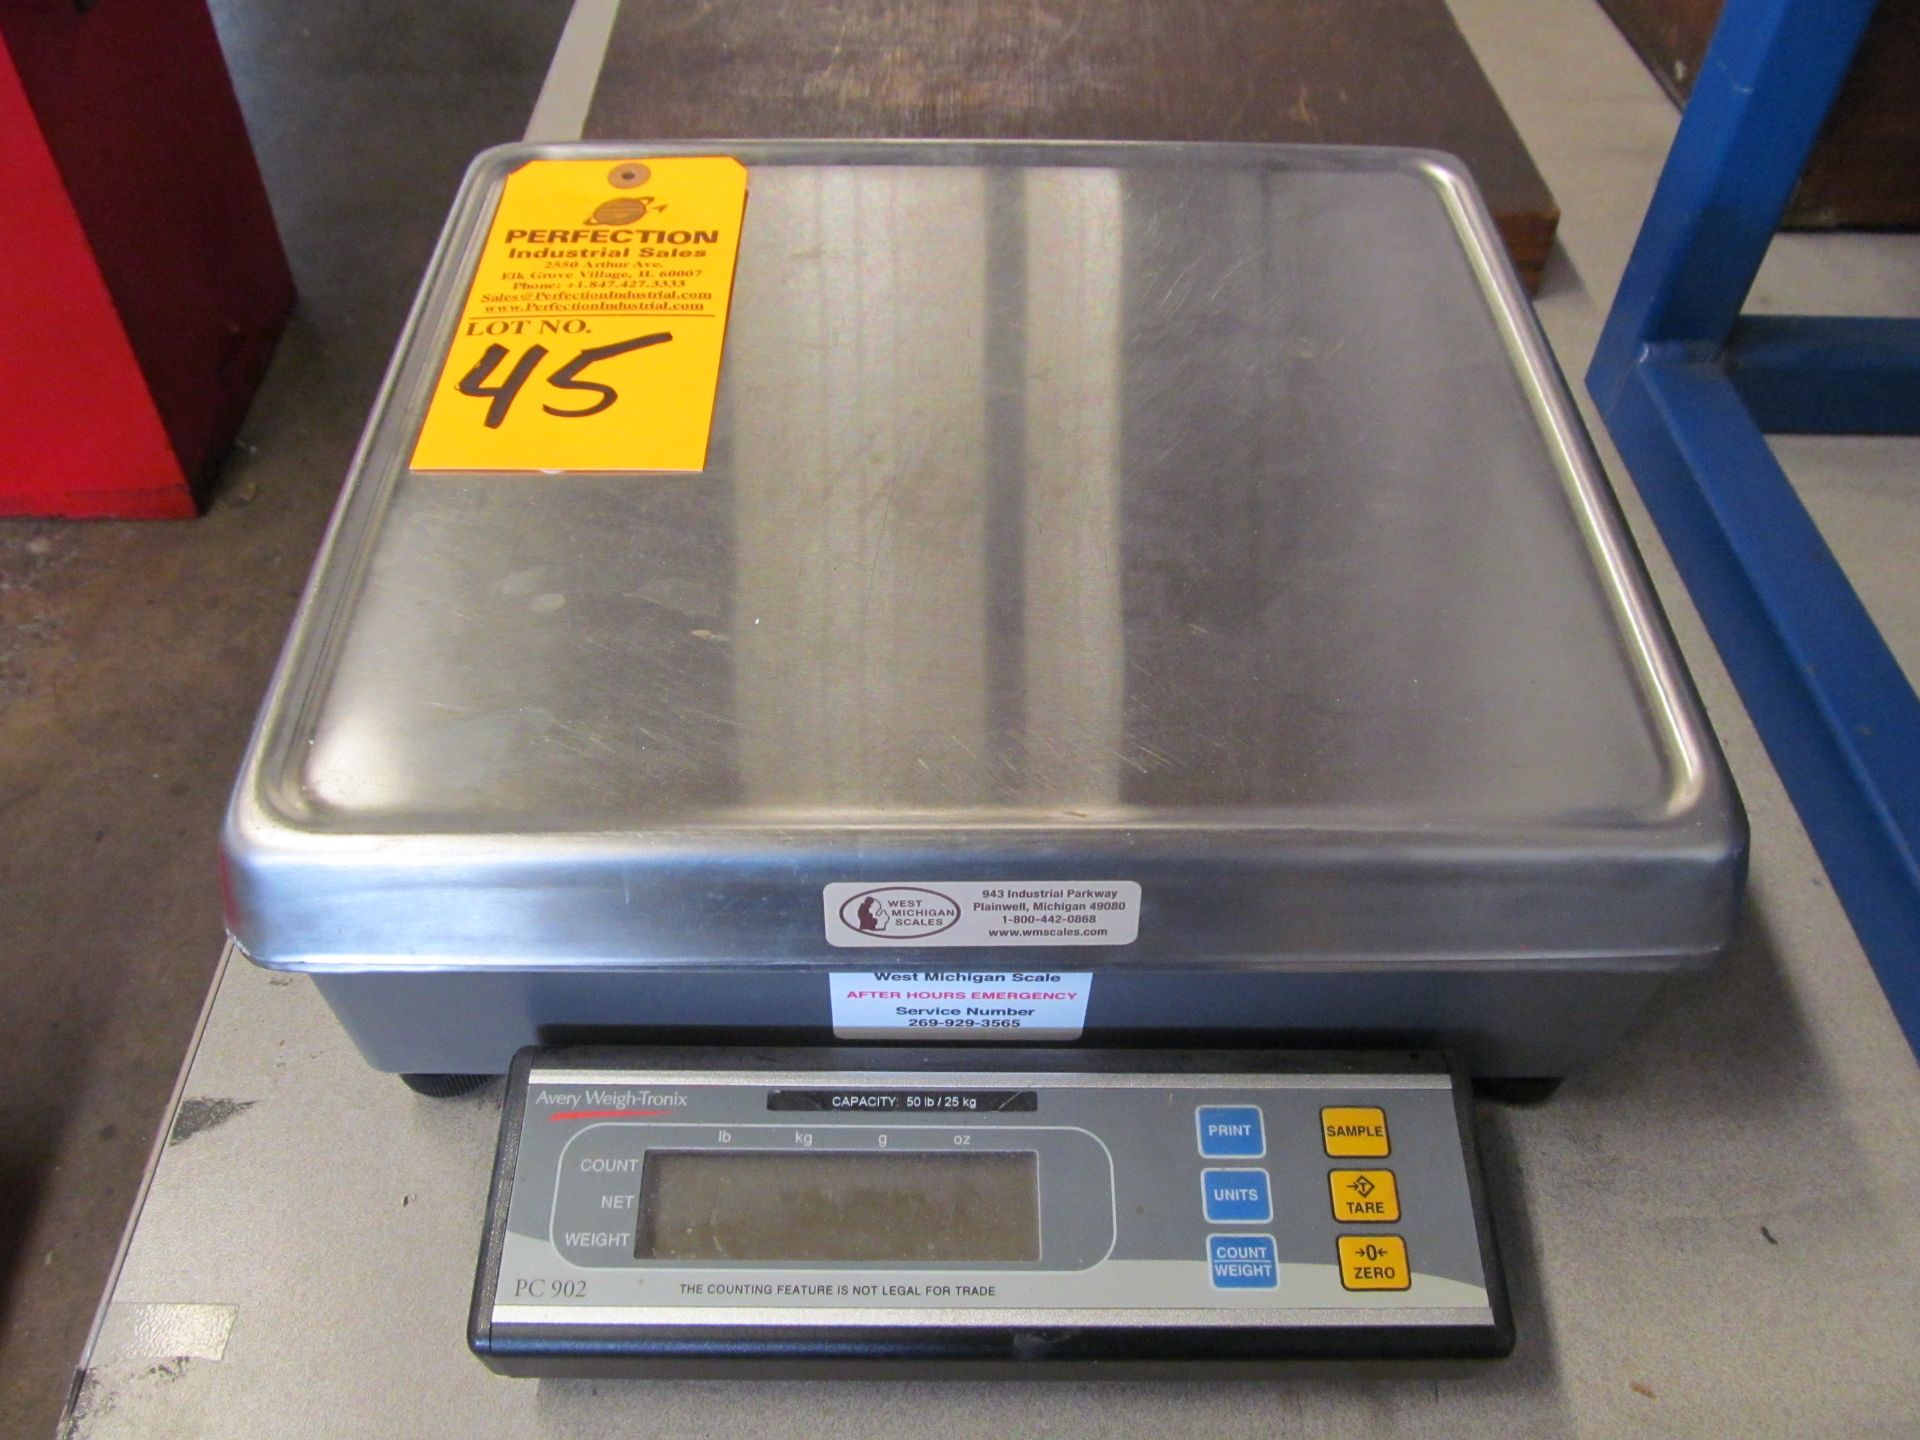 50 lb. Avery weigh-Tronix PC902 Counting Scale